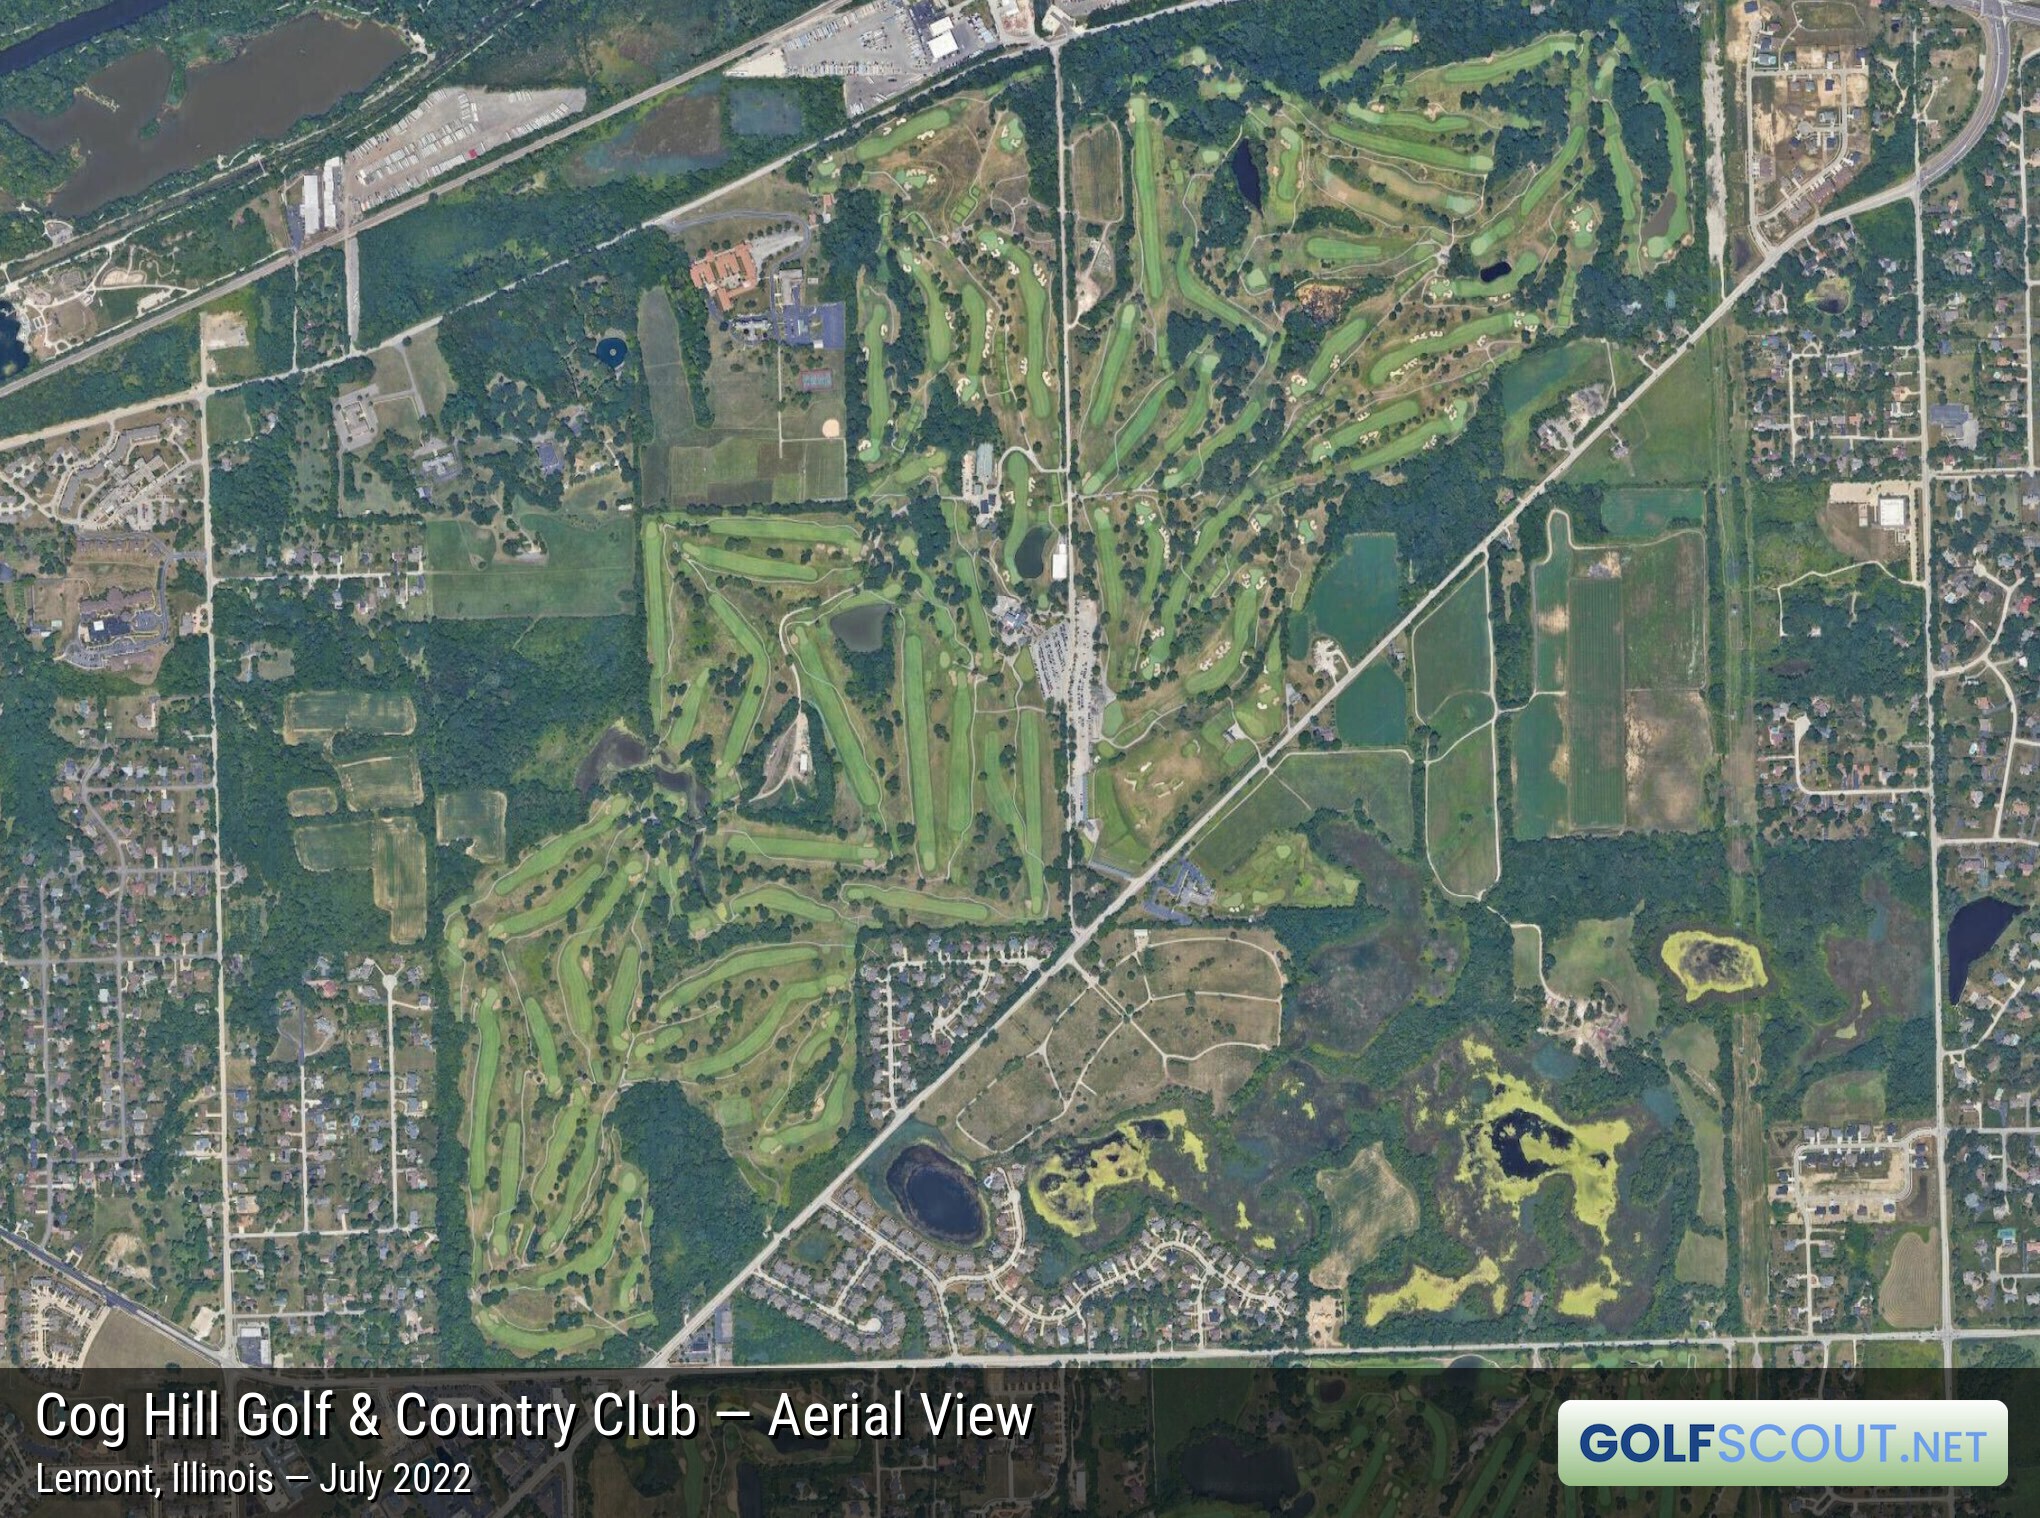 Aerial satellite imagery of Cog Hill Course #4 - Dubsdread in Palos Park, Illinois. Cog Hill has 4 courses. Courses 2 and 4 are located in the northeast portion of the property. Image courtesy of Google Maps.